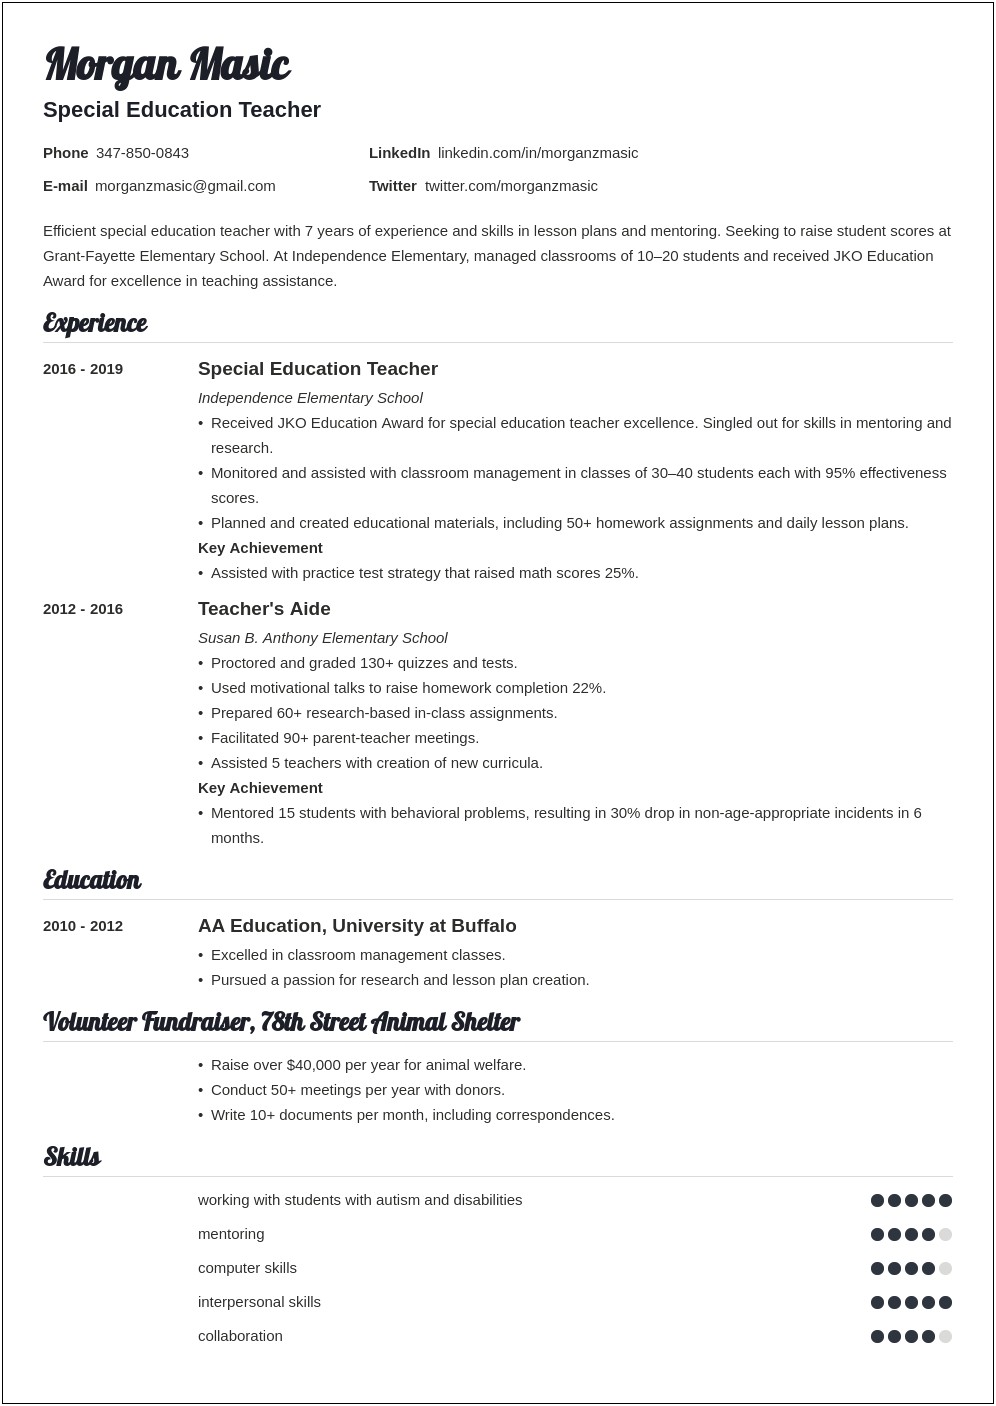 Sample Resumes For Special Education Teachers With Experience